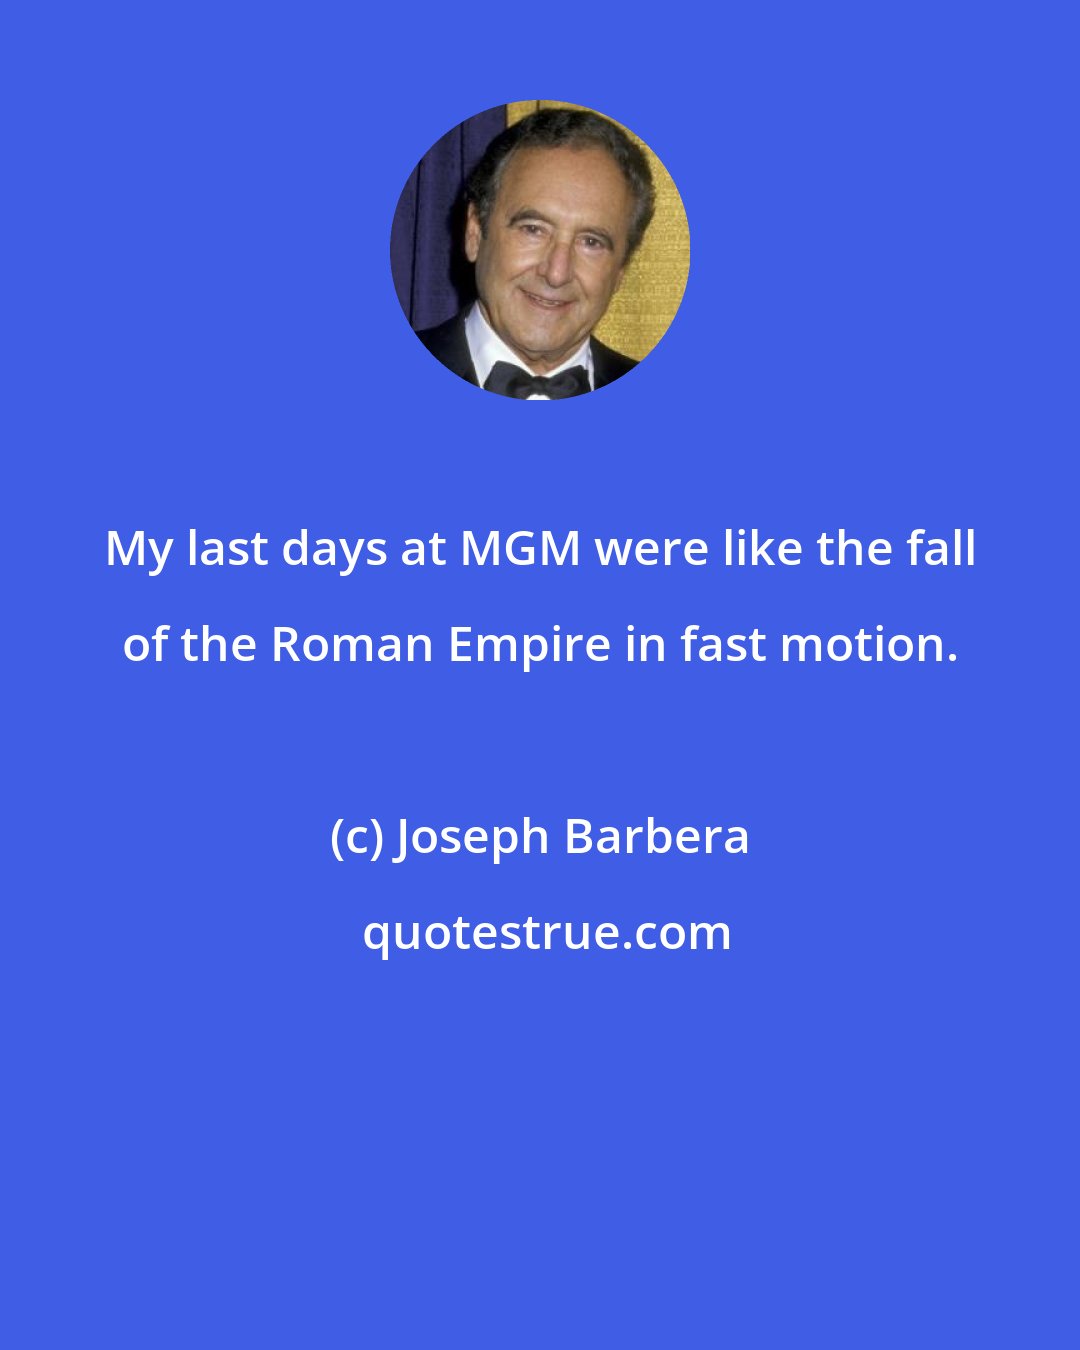 Joseph Barbera: My last days at MGM were like the fall of the Roman Empire in fast motion.